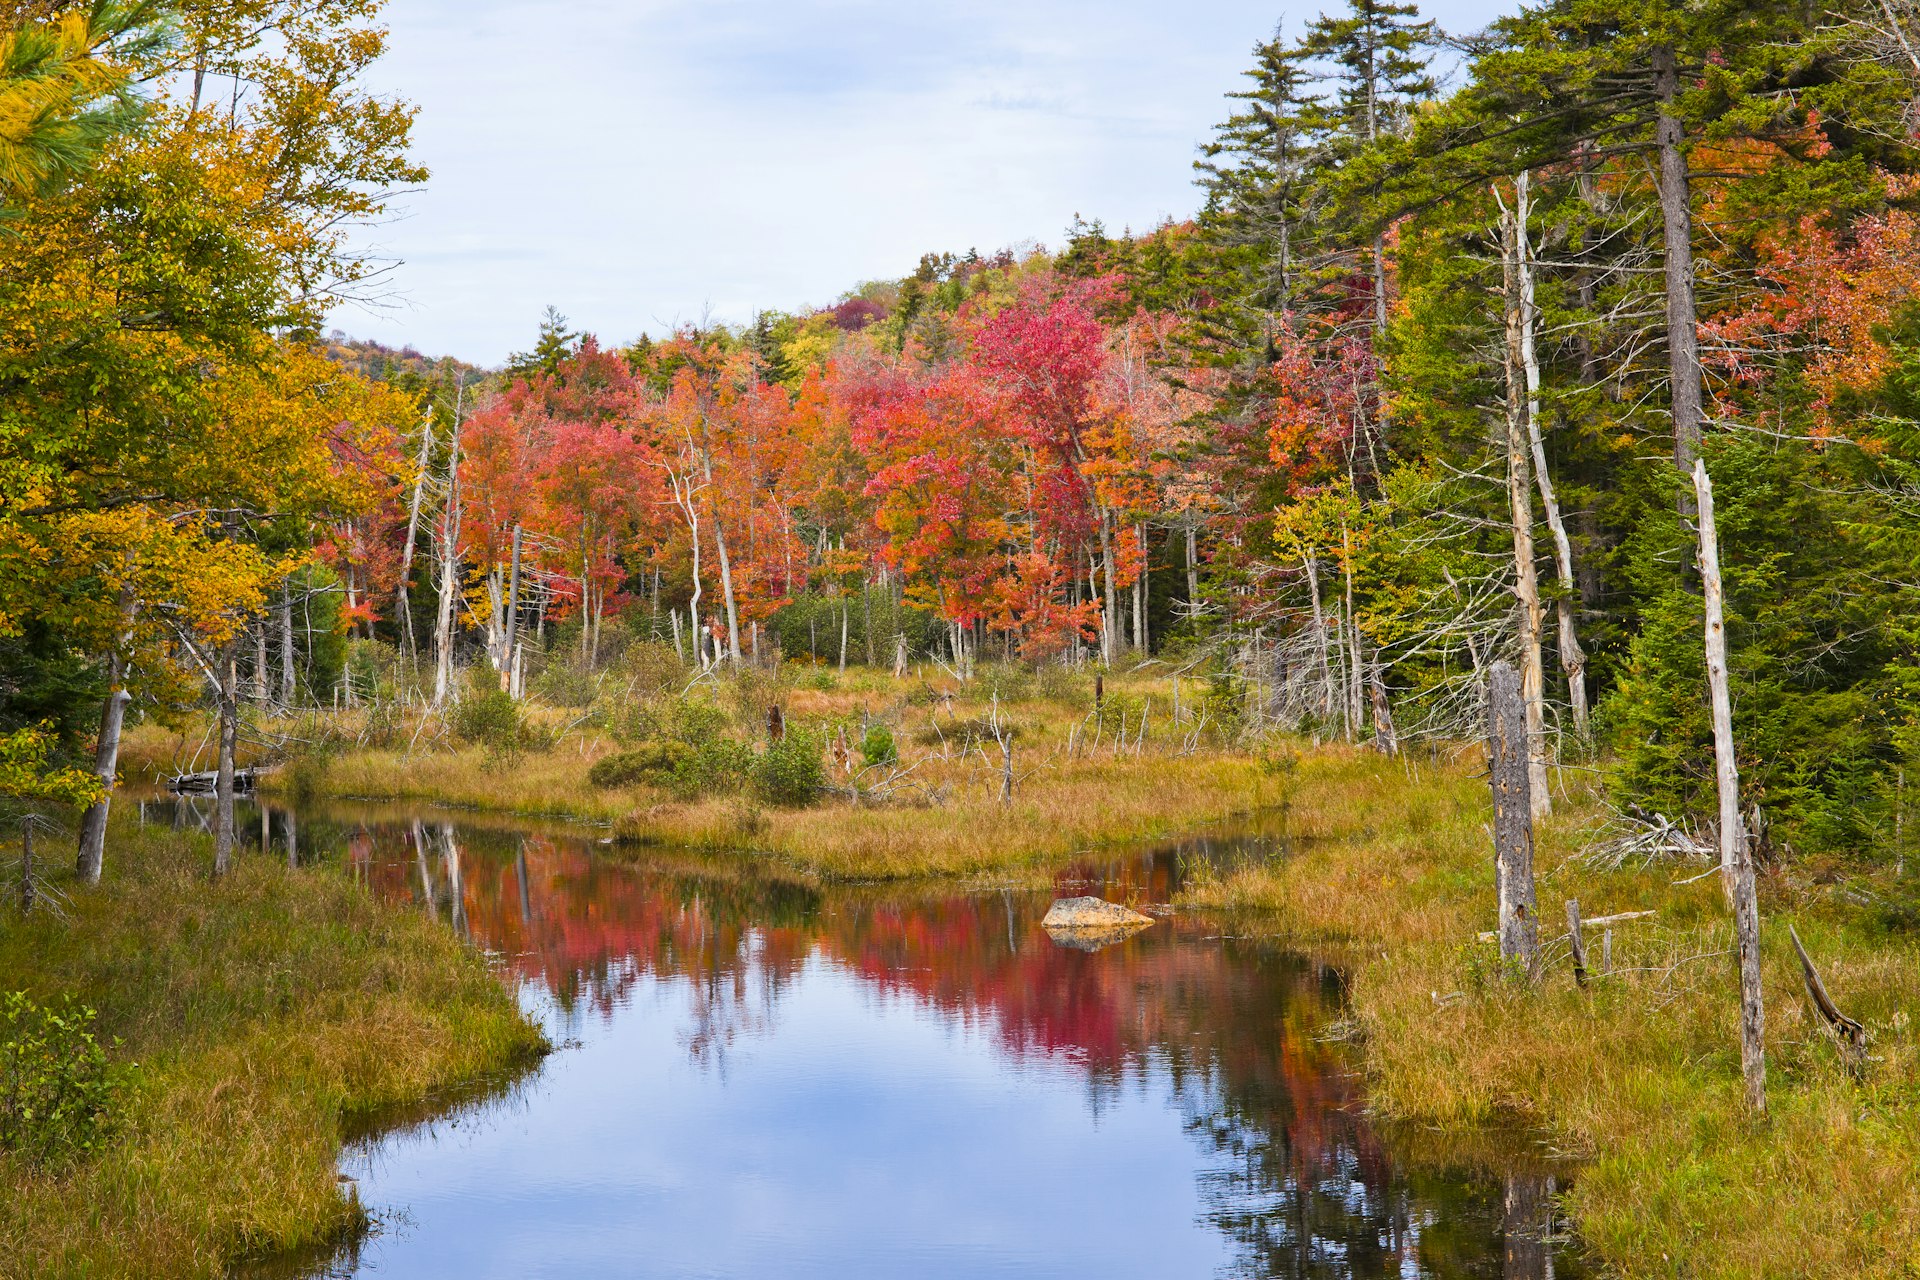 A stream in the Adirondacks in autumn (Fall) colors